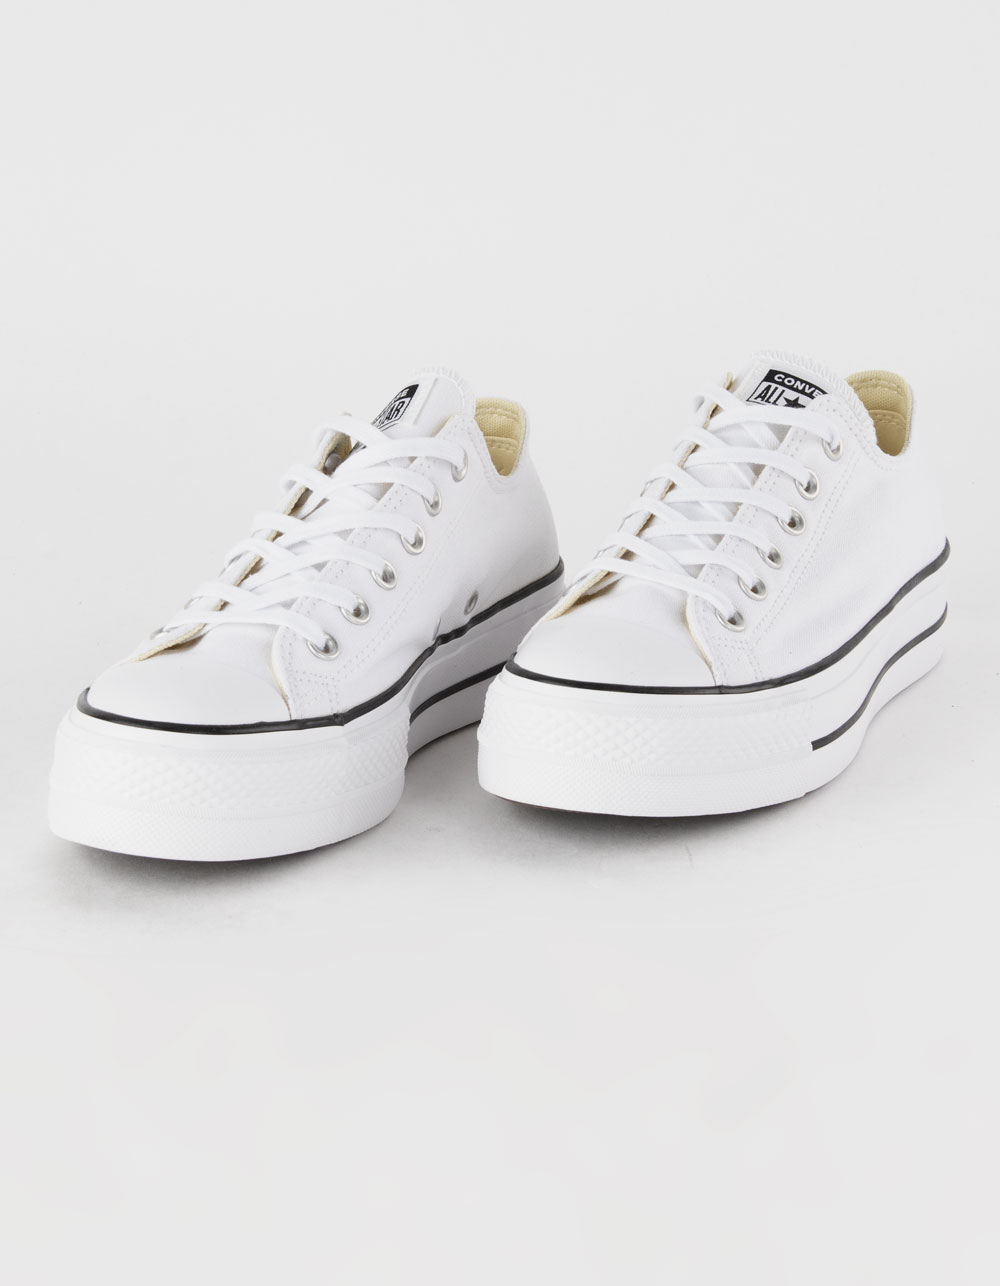 Chuck Taylor Converse All Star Tennis Shoes - clothing